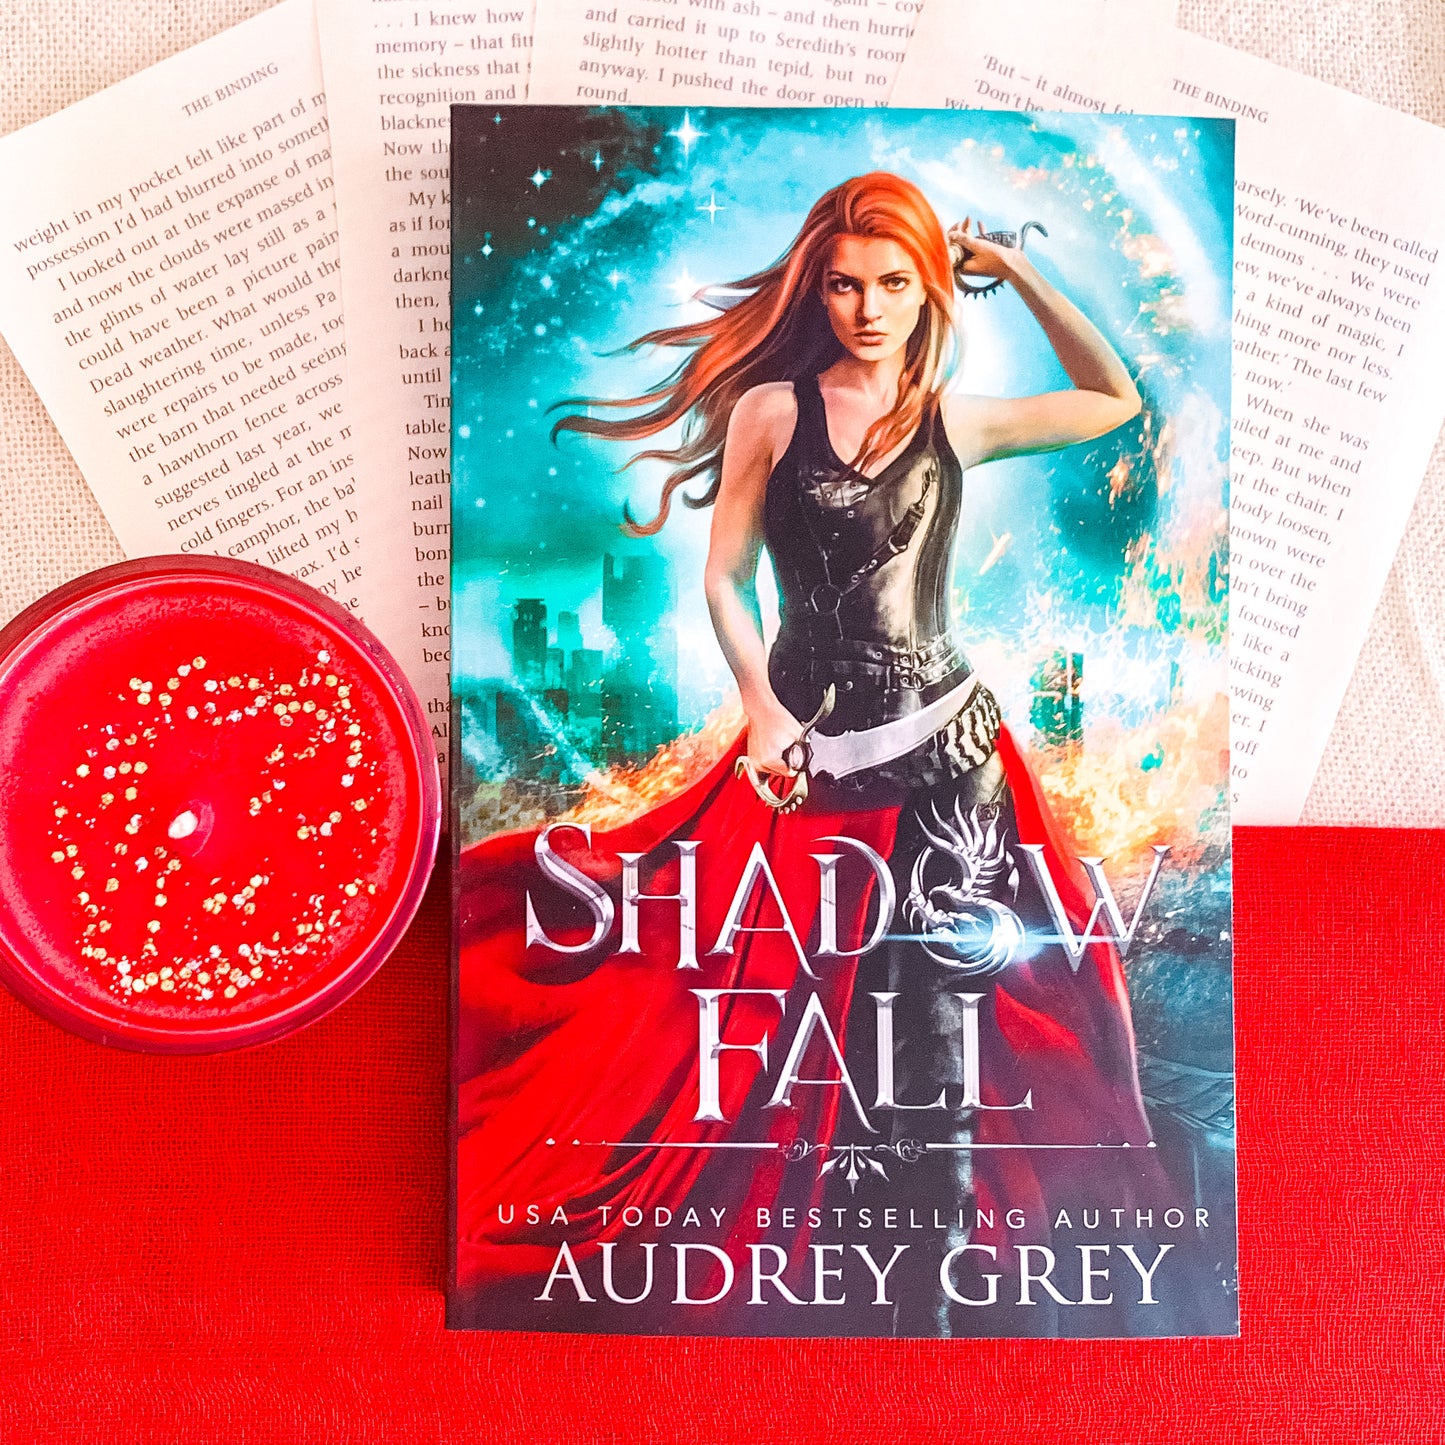 Shadow Fall Series by Audrey Grey